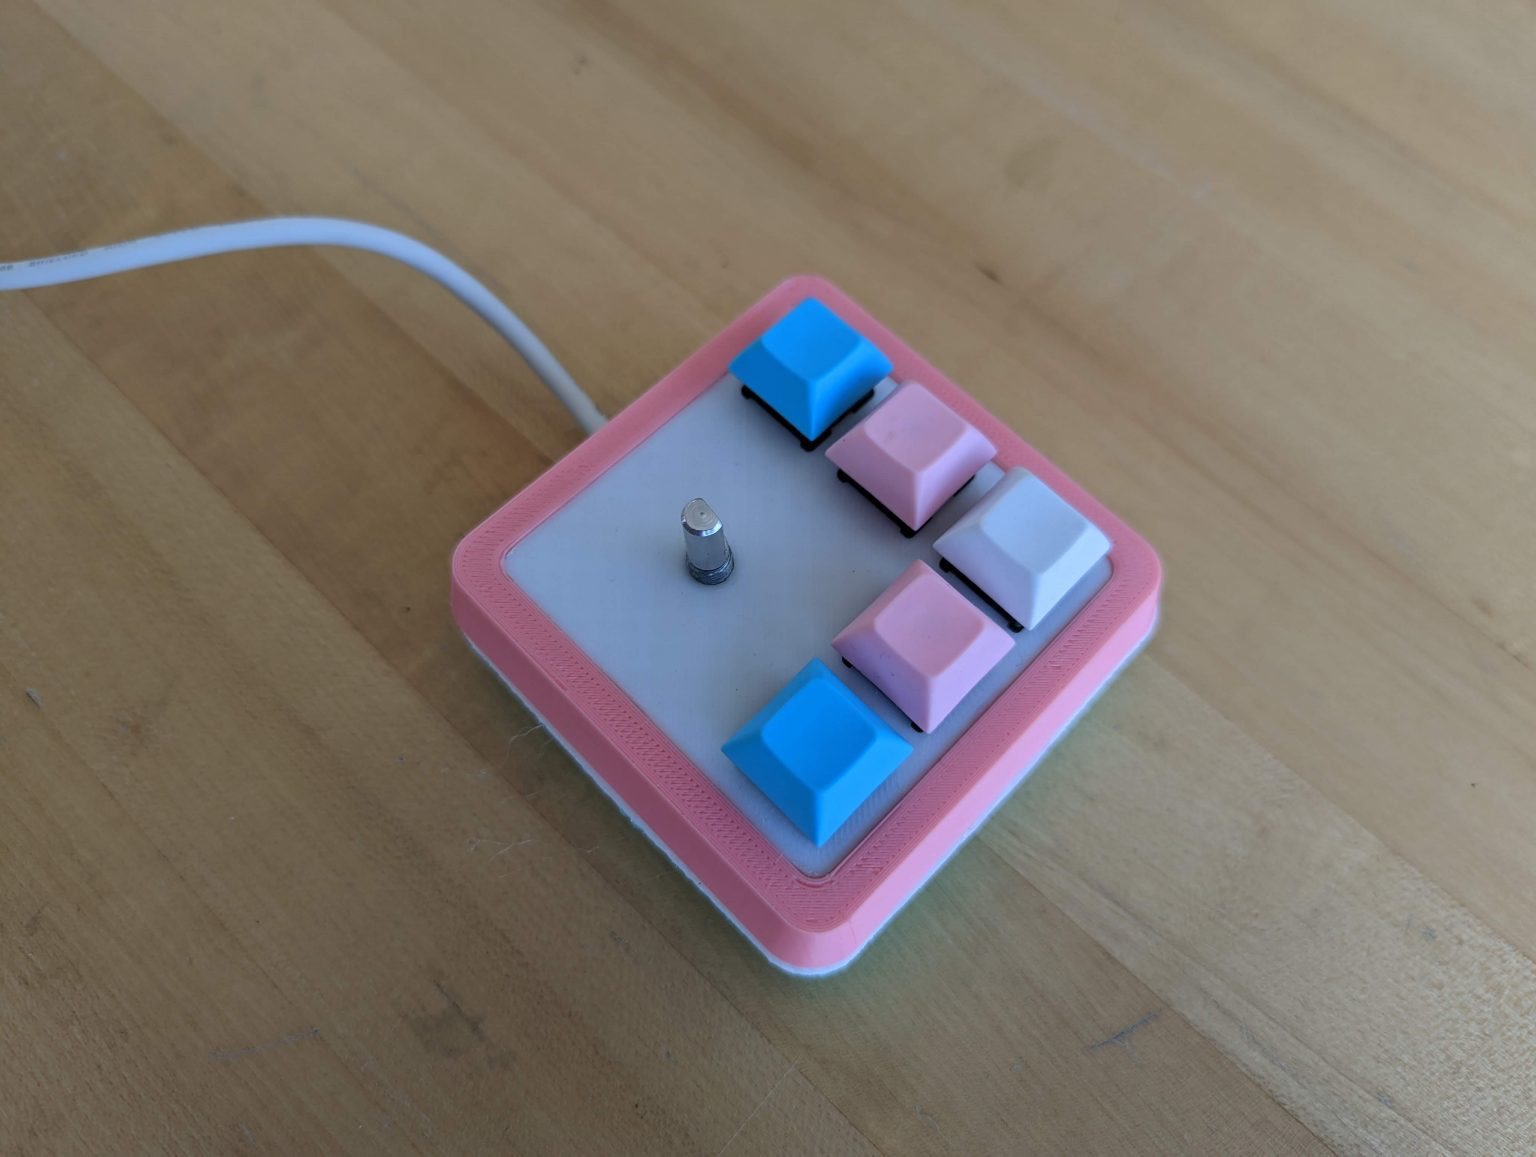 The cute Pico Macropad eases the transition to the desktop